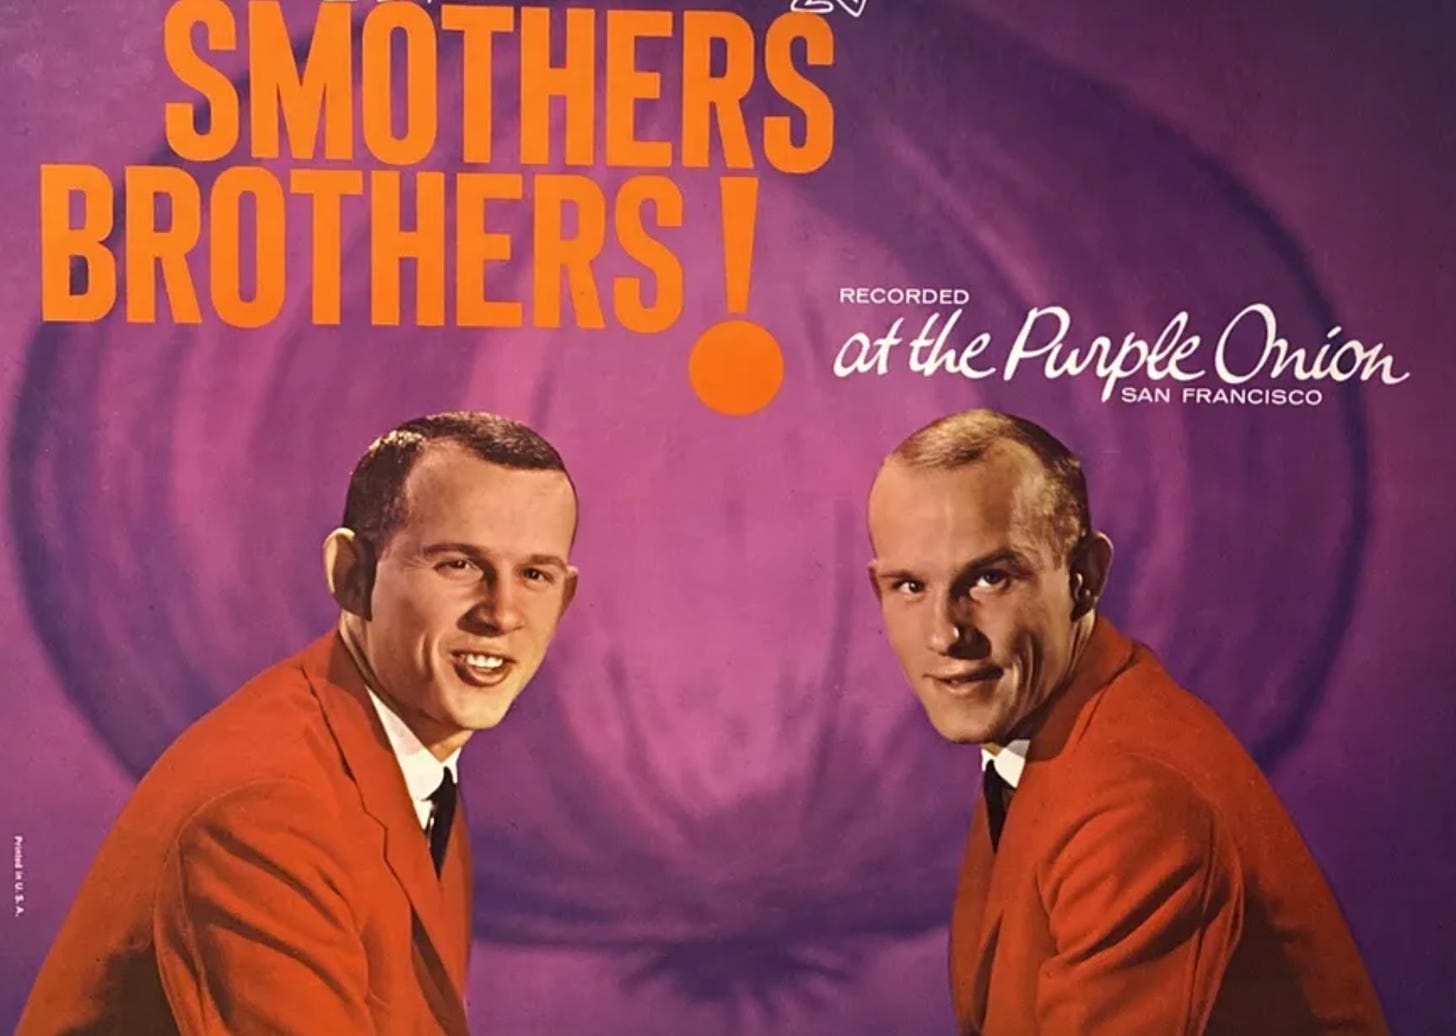 Tommy Smothers on a Smothers Brothers comedy album cover